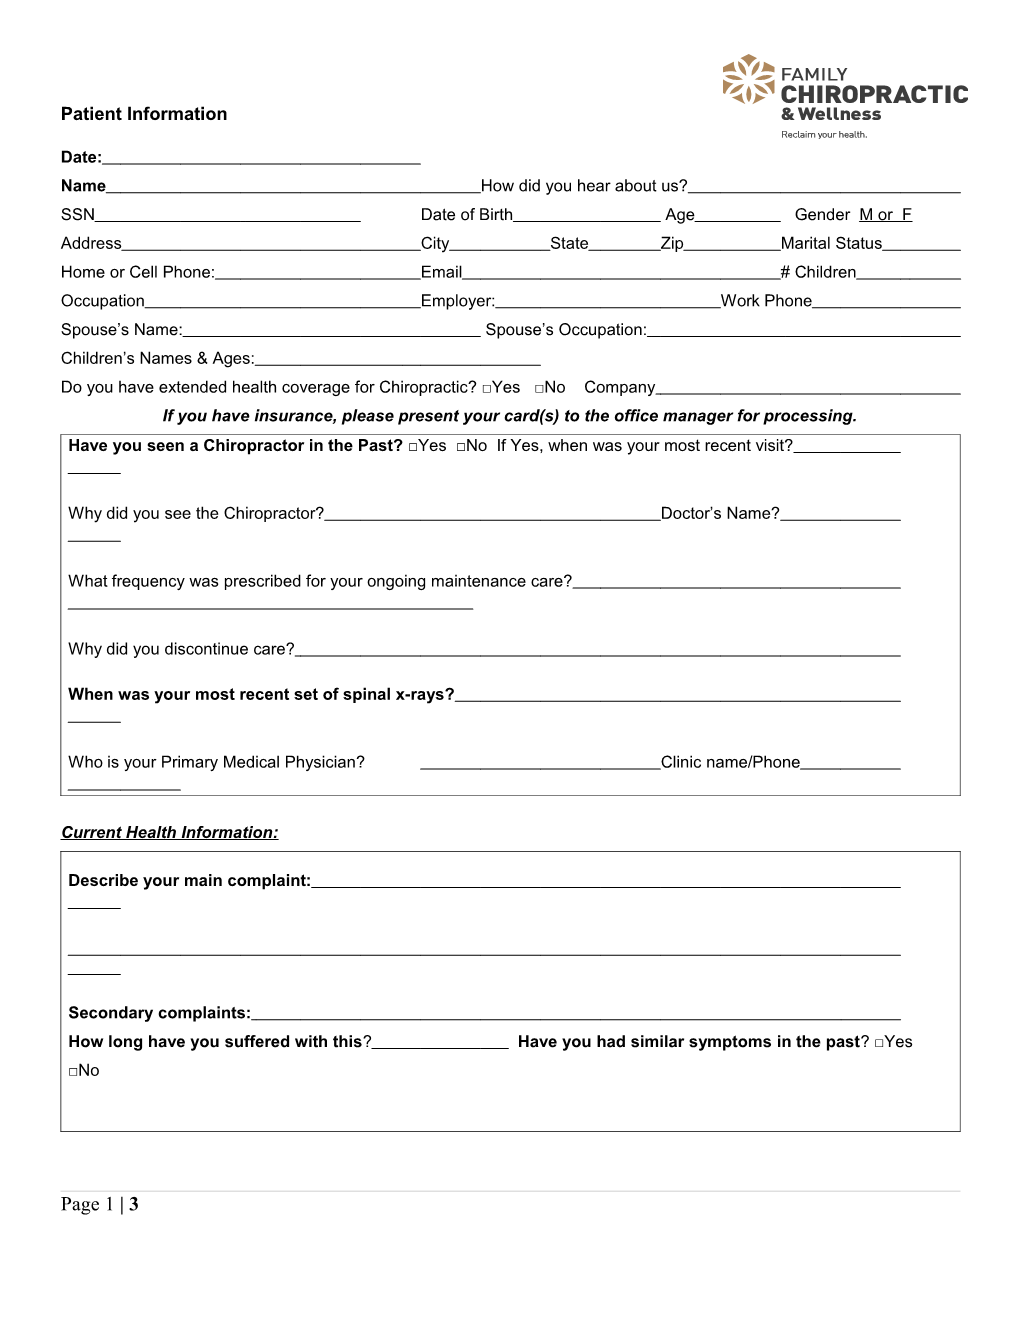 New Patient Intake Form with Consent & Pain Drawing